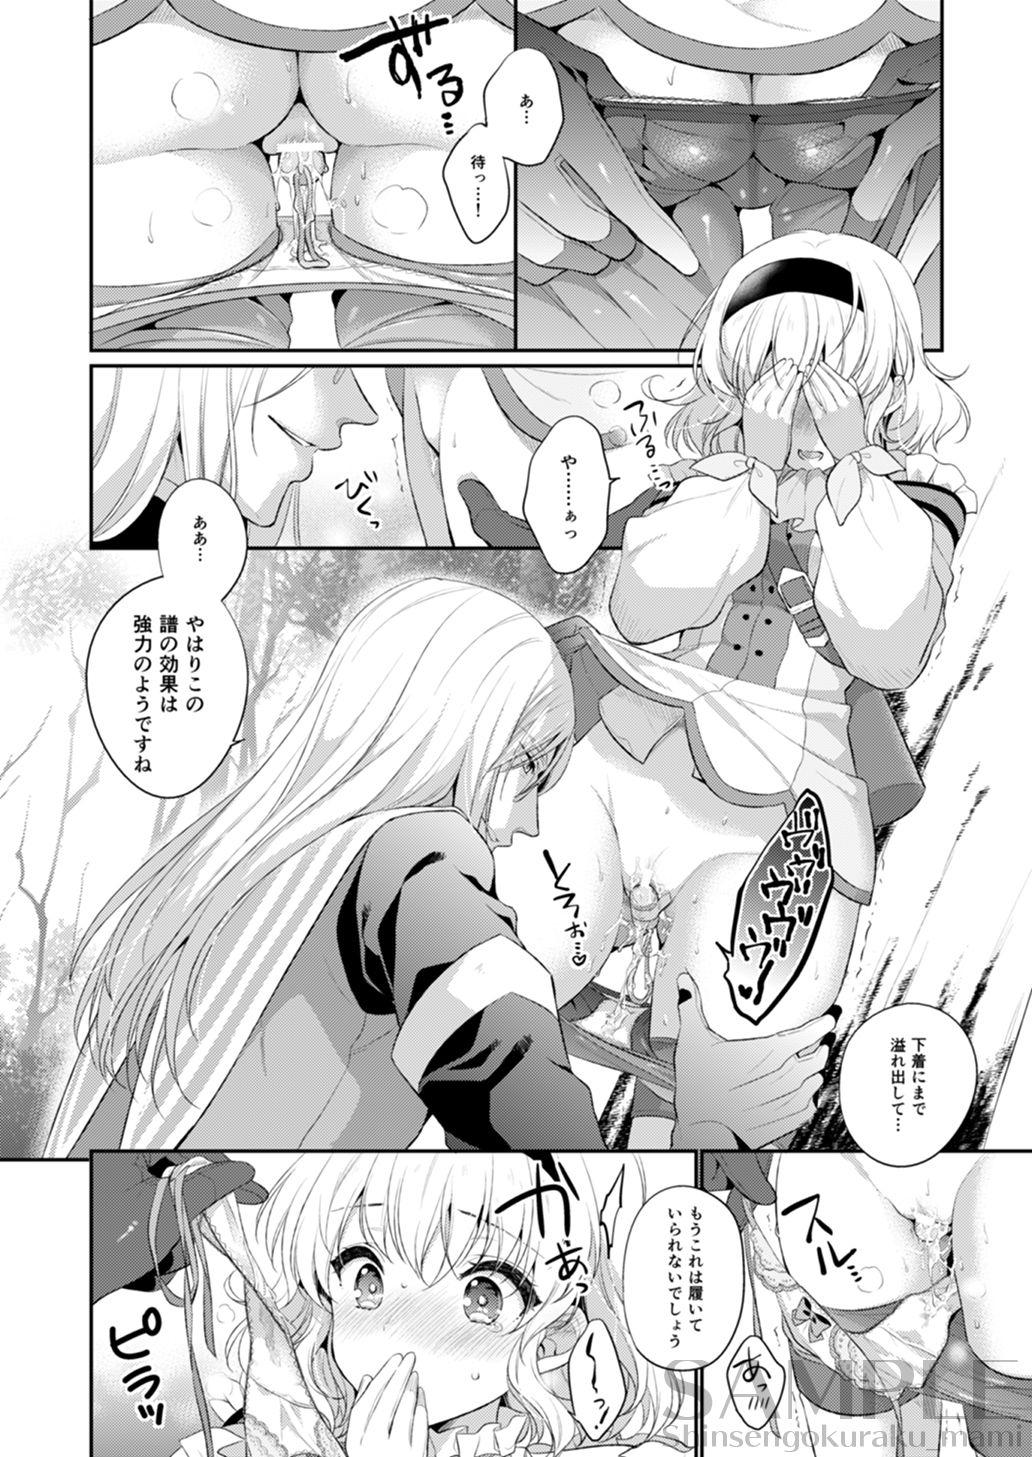 Tit dolcemente - Tales of the abyss Asshole - Page 11